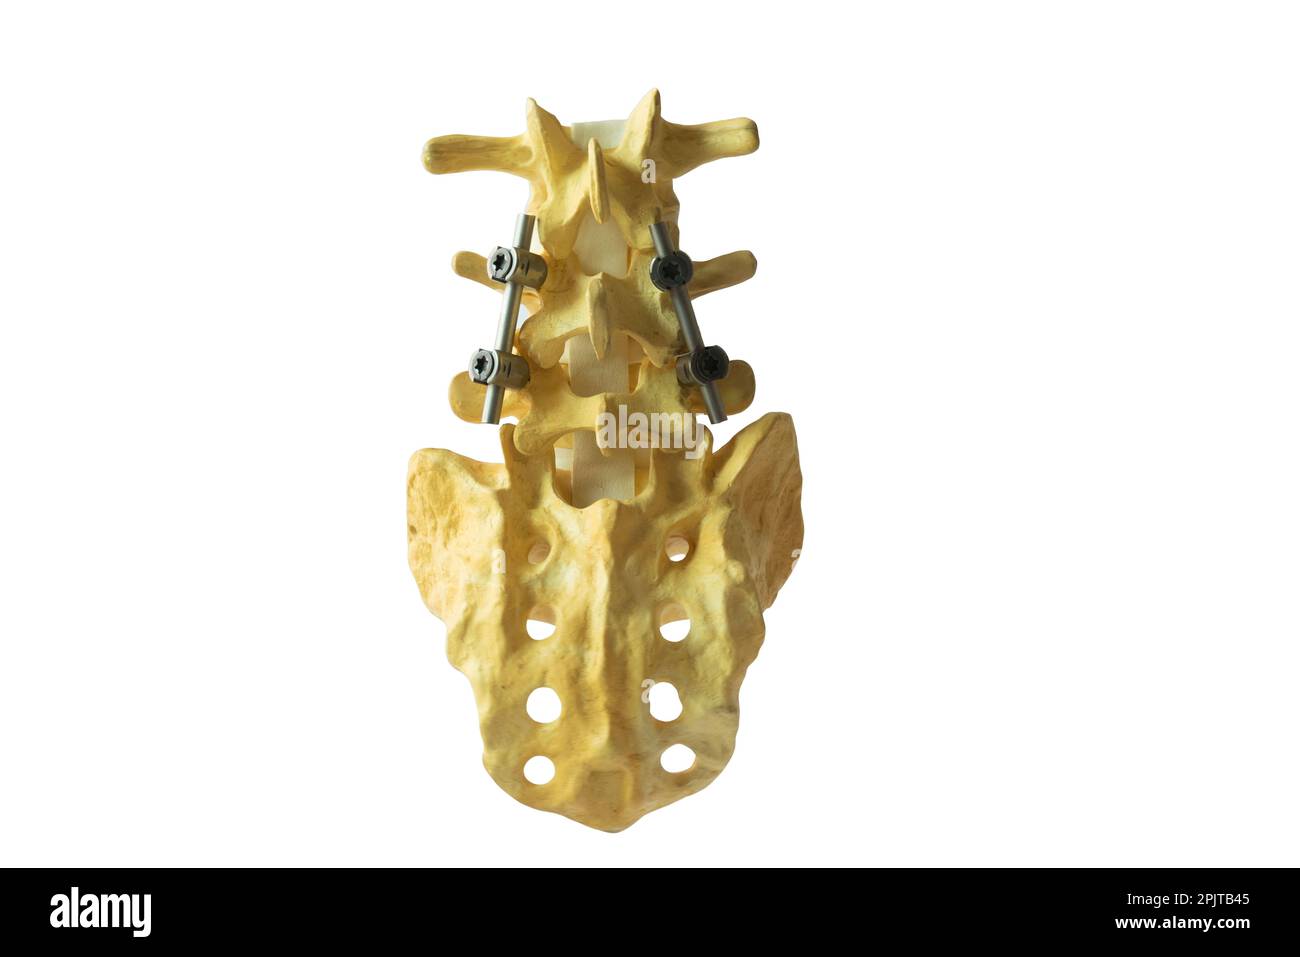 Lumbra spine model with rod and screw instrument fixation isolated on white background with clipping path. Stock Photo